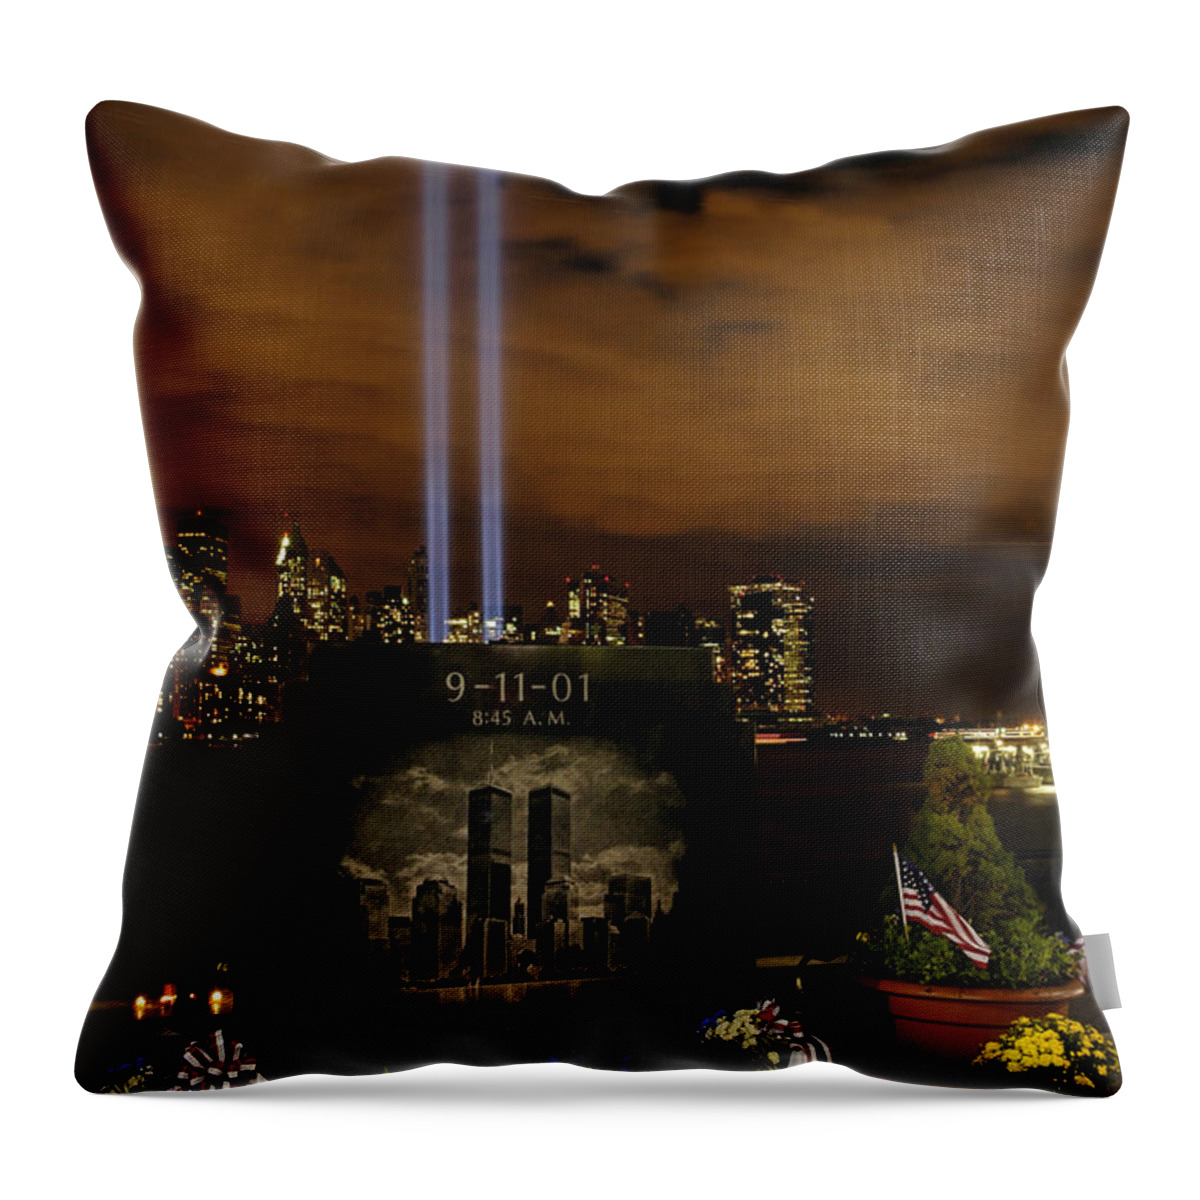 9-11.nine Eleven Throw Pillow featuring the photograph 9-11 Monument by Dave Mills